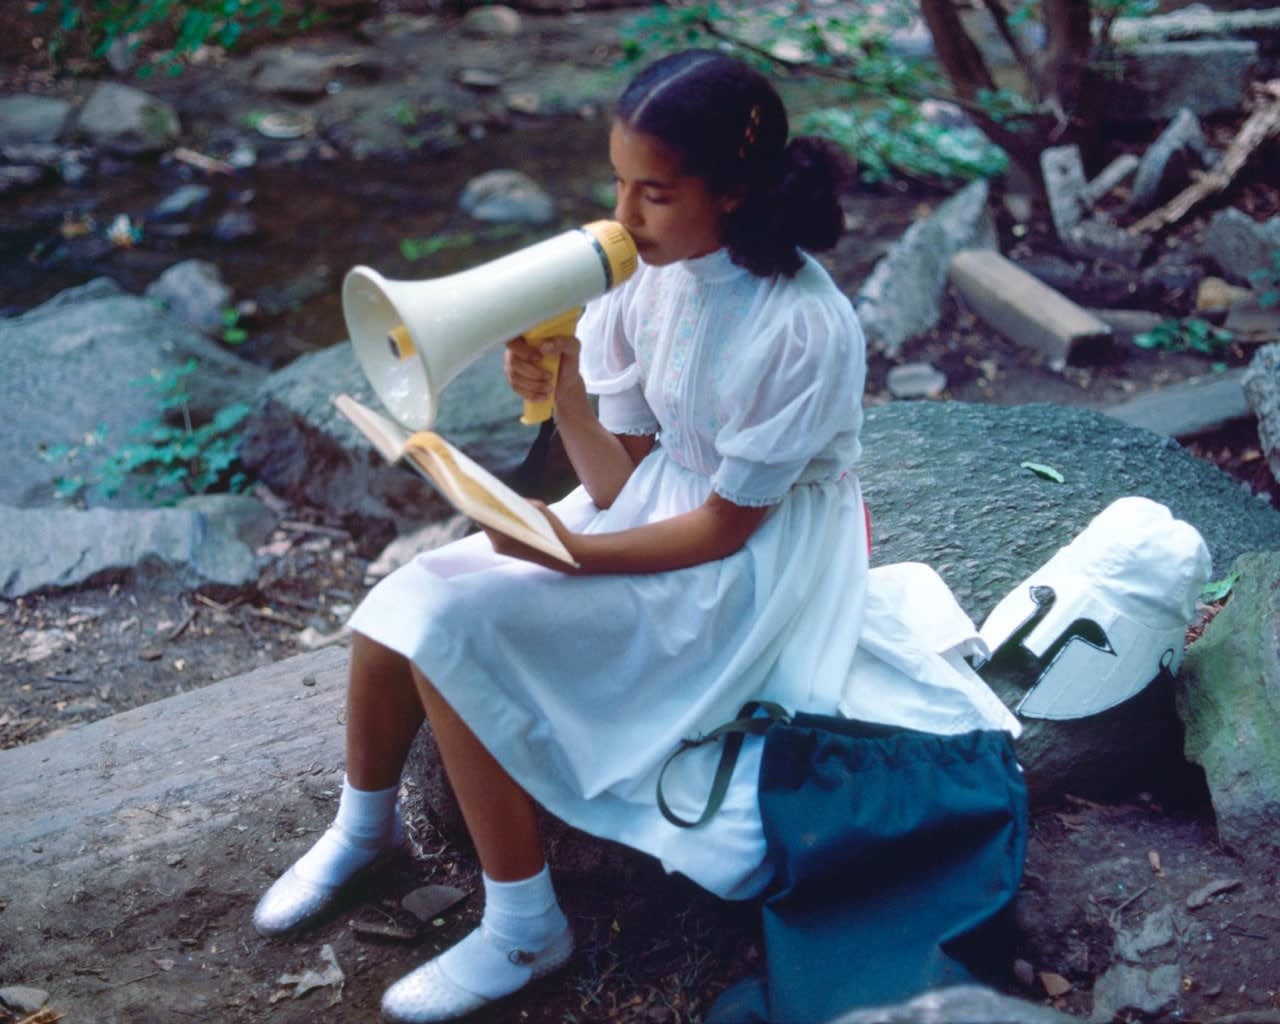 Lorraine O'Grady, Rivers, First Draft: A Little Girl with Pink Sash memorizes her Latin lesson, 1982/2015